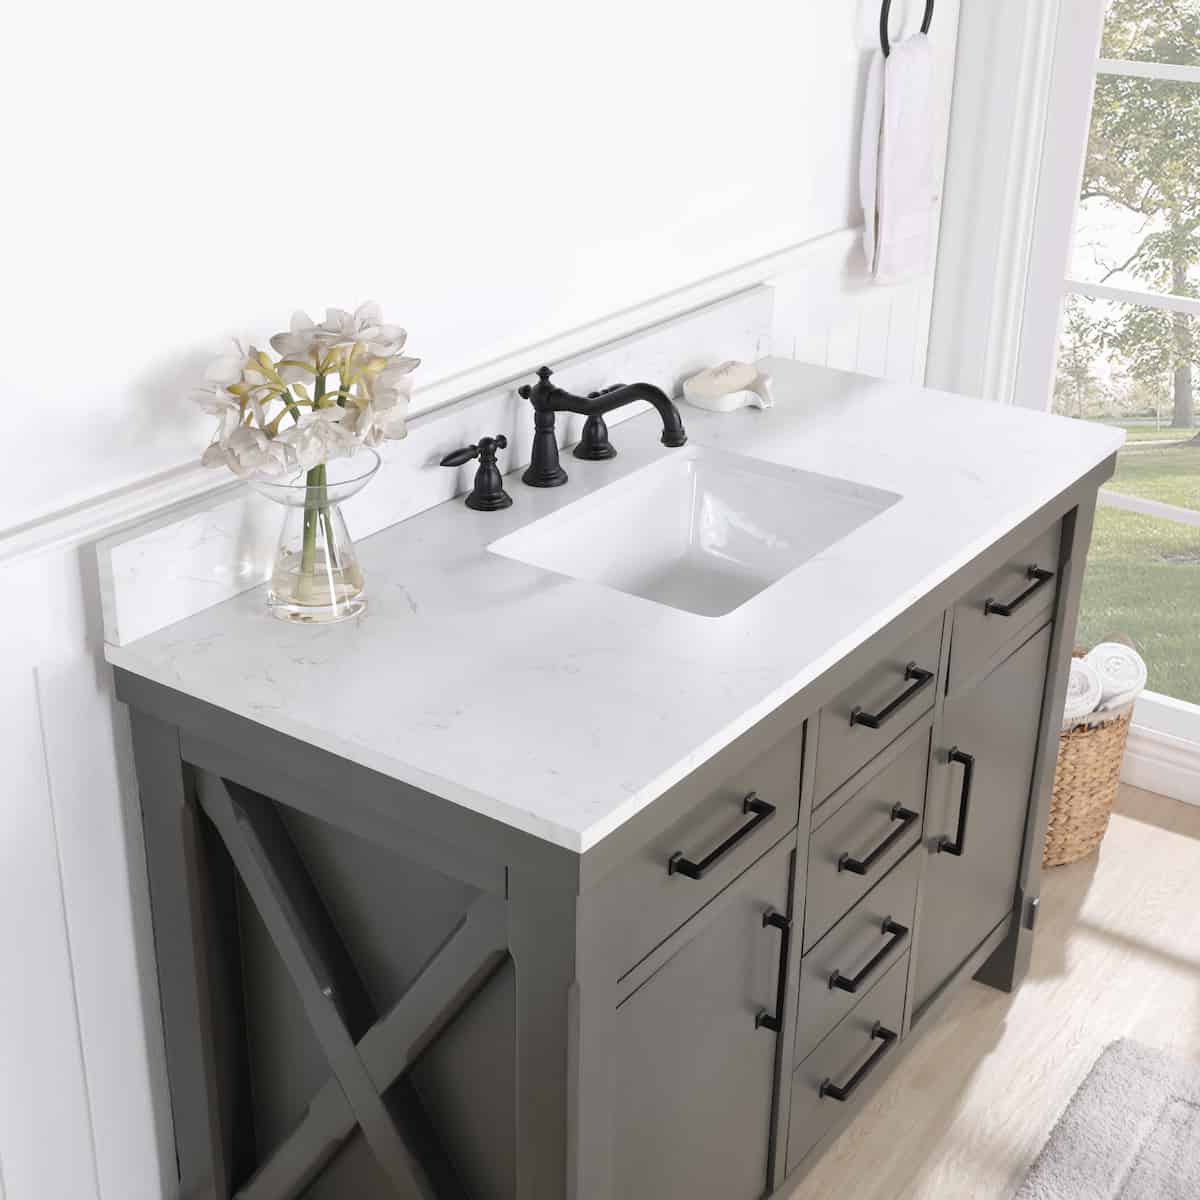 Vinnova Viella 48 Inch Freestanding Single Sink Bath Vanity in Rust Grey Finish with White Composite Countertop Without Mirror Counter 701848-RU-WS-NM